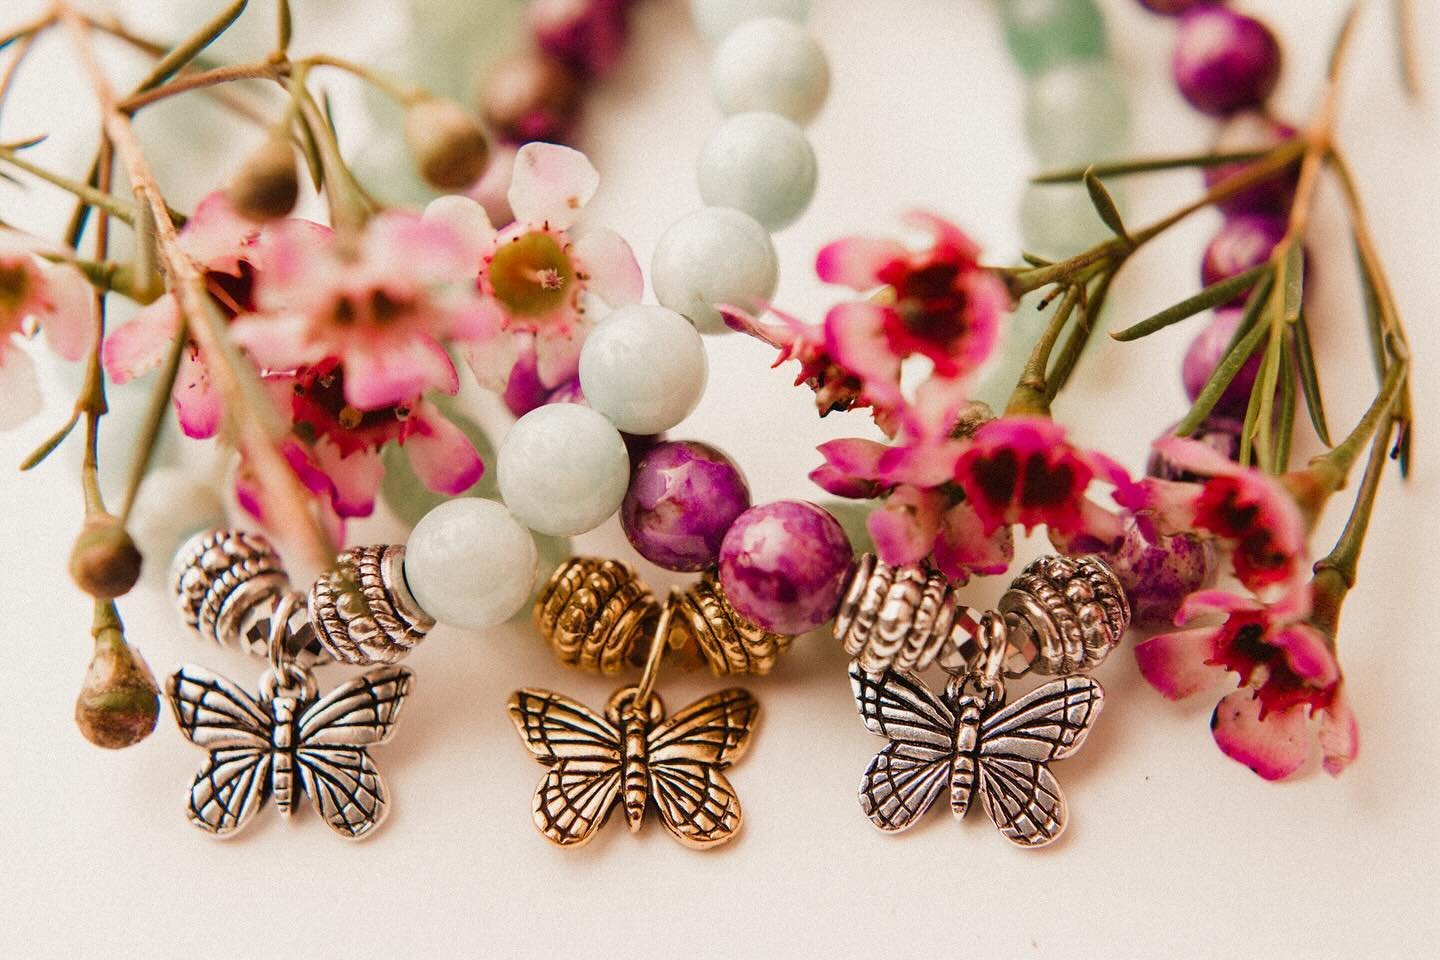 Shop this site exclusive! 🦋 Our butterfly charm, representing soul energy, change and life ✨
&bull;
&bull;
&bull;
&bull;
&bull;
&bull;
&bull;
&bull;
&bull;
&bull; #giftsformom #mothersdaygift #charmbracelets #butterfly #semipreciousjewelry #bohostyl